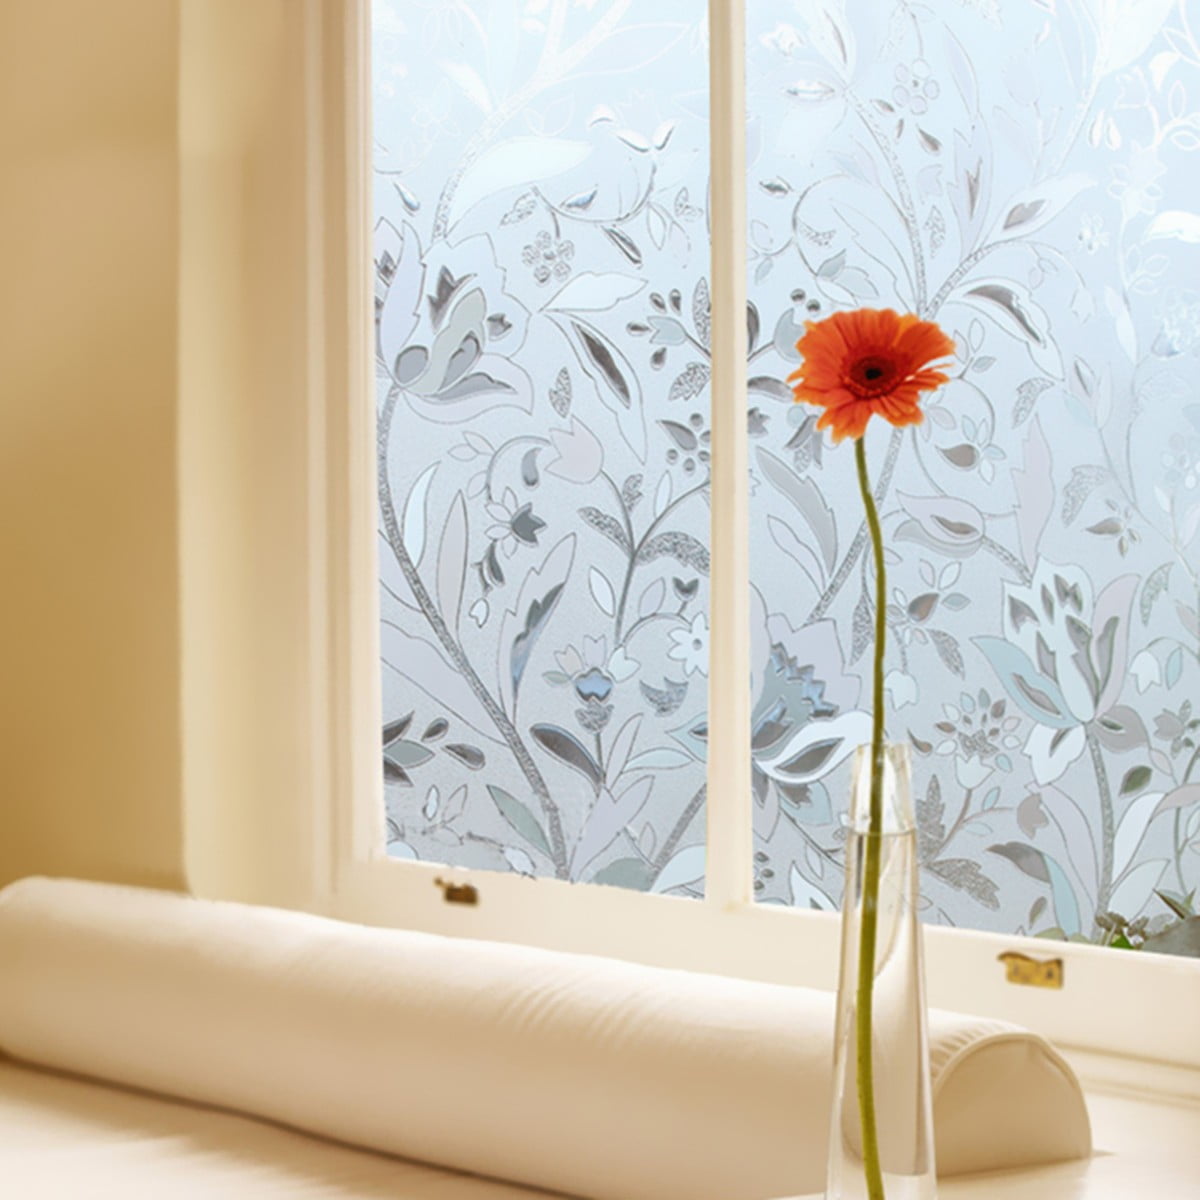 Waterproof PVC Privacy Frosted Home Bedroom Bathroom Window Sticker Glass Film 